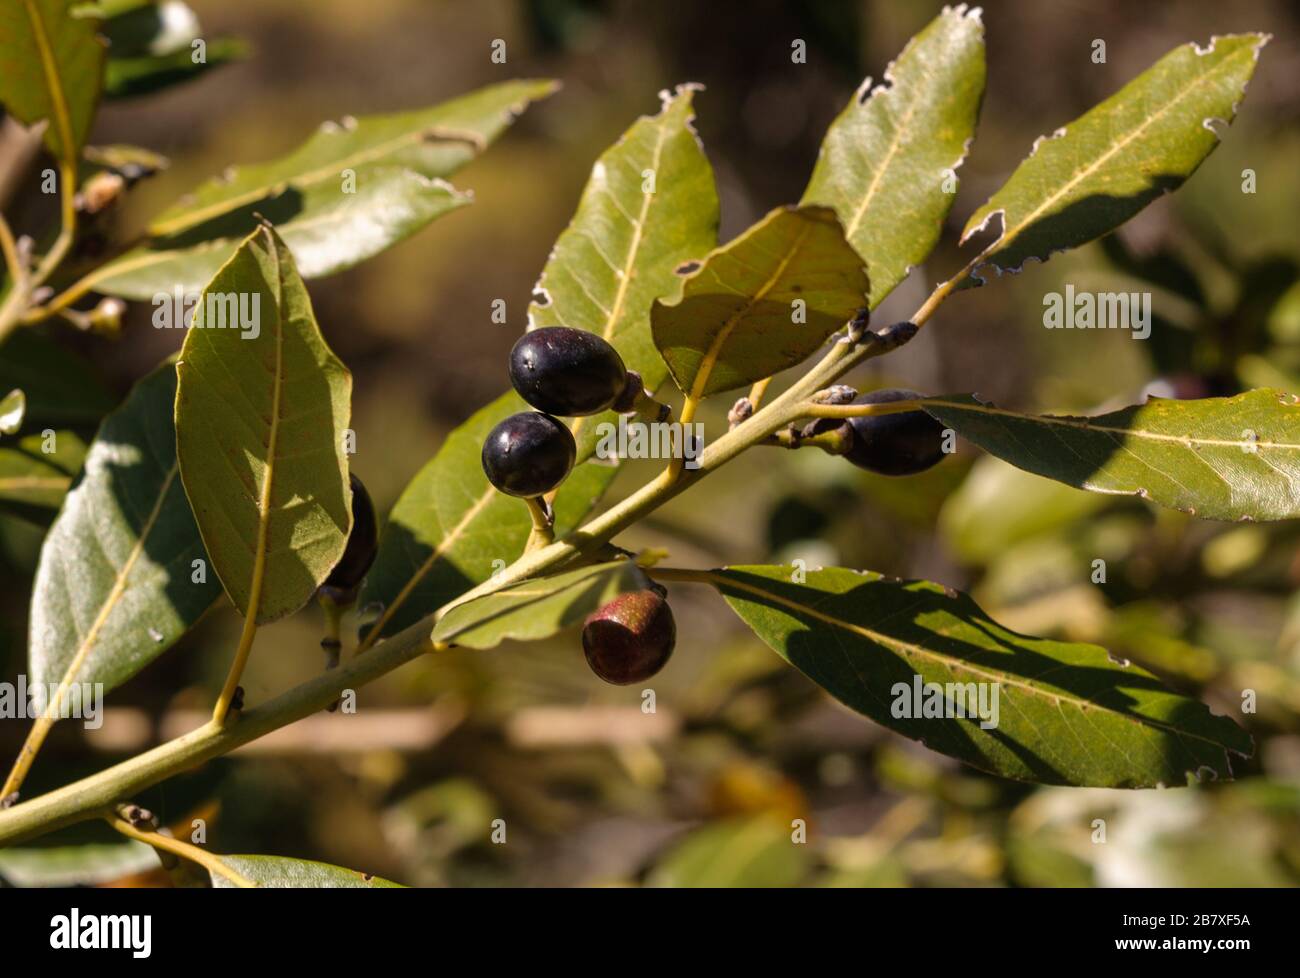 Branch with ripe fruits of Laurus novocanariensis, an endemic Lauraceae of the Canary Islands and Madeira Stock Photo